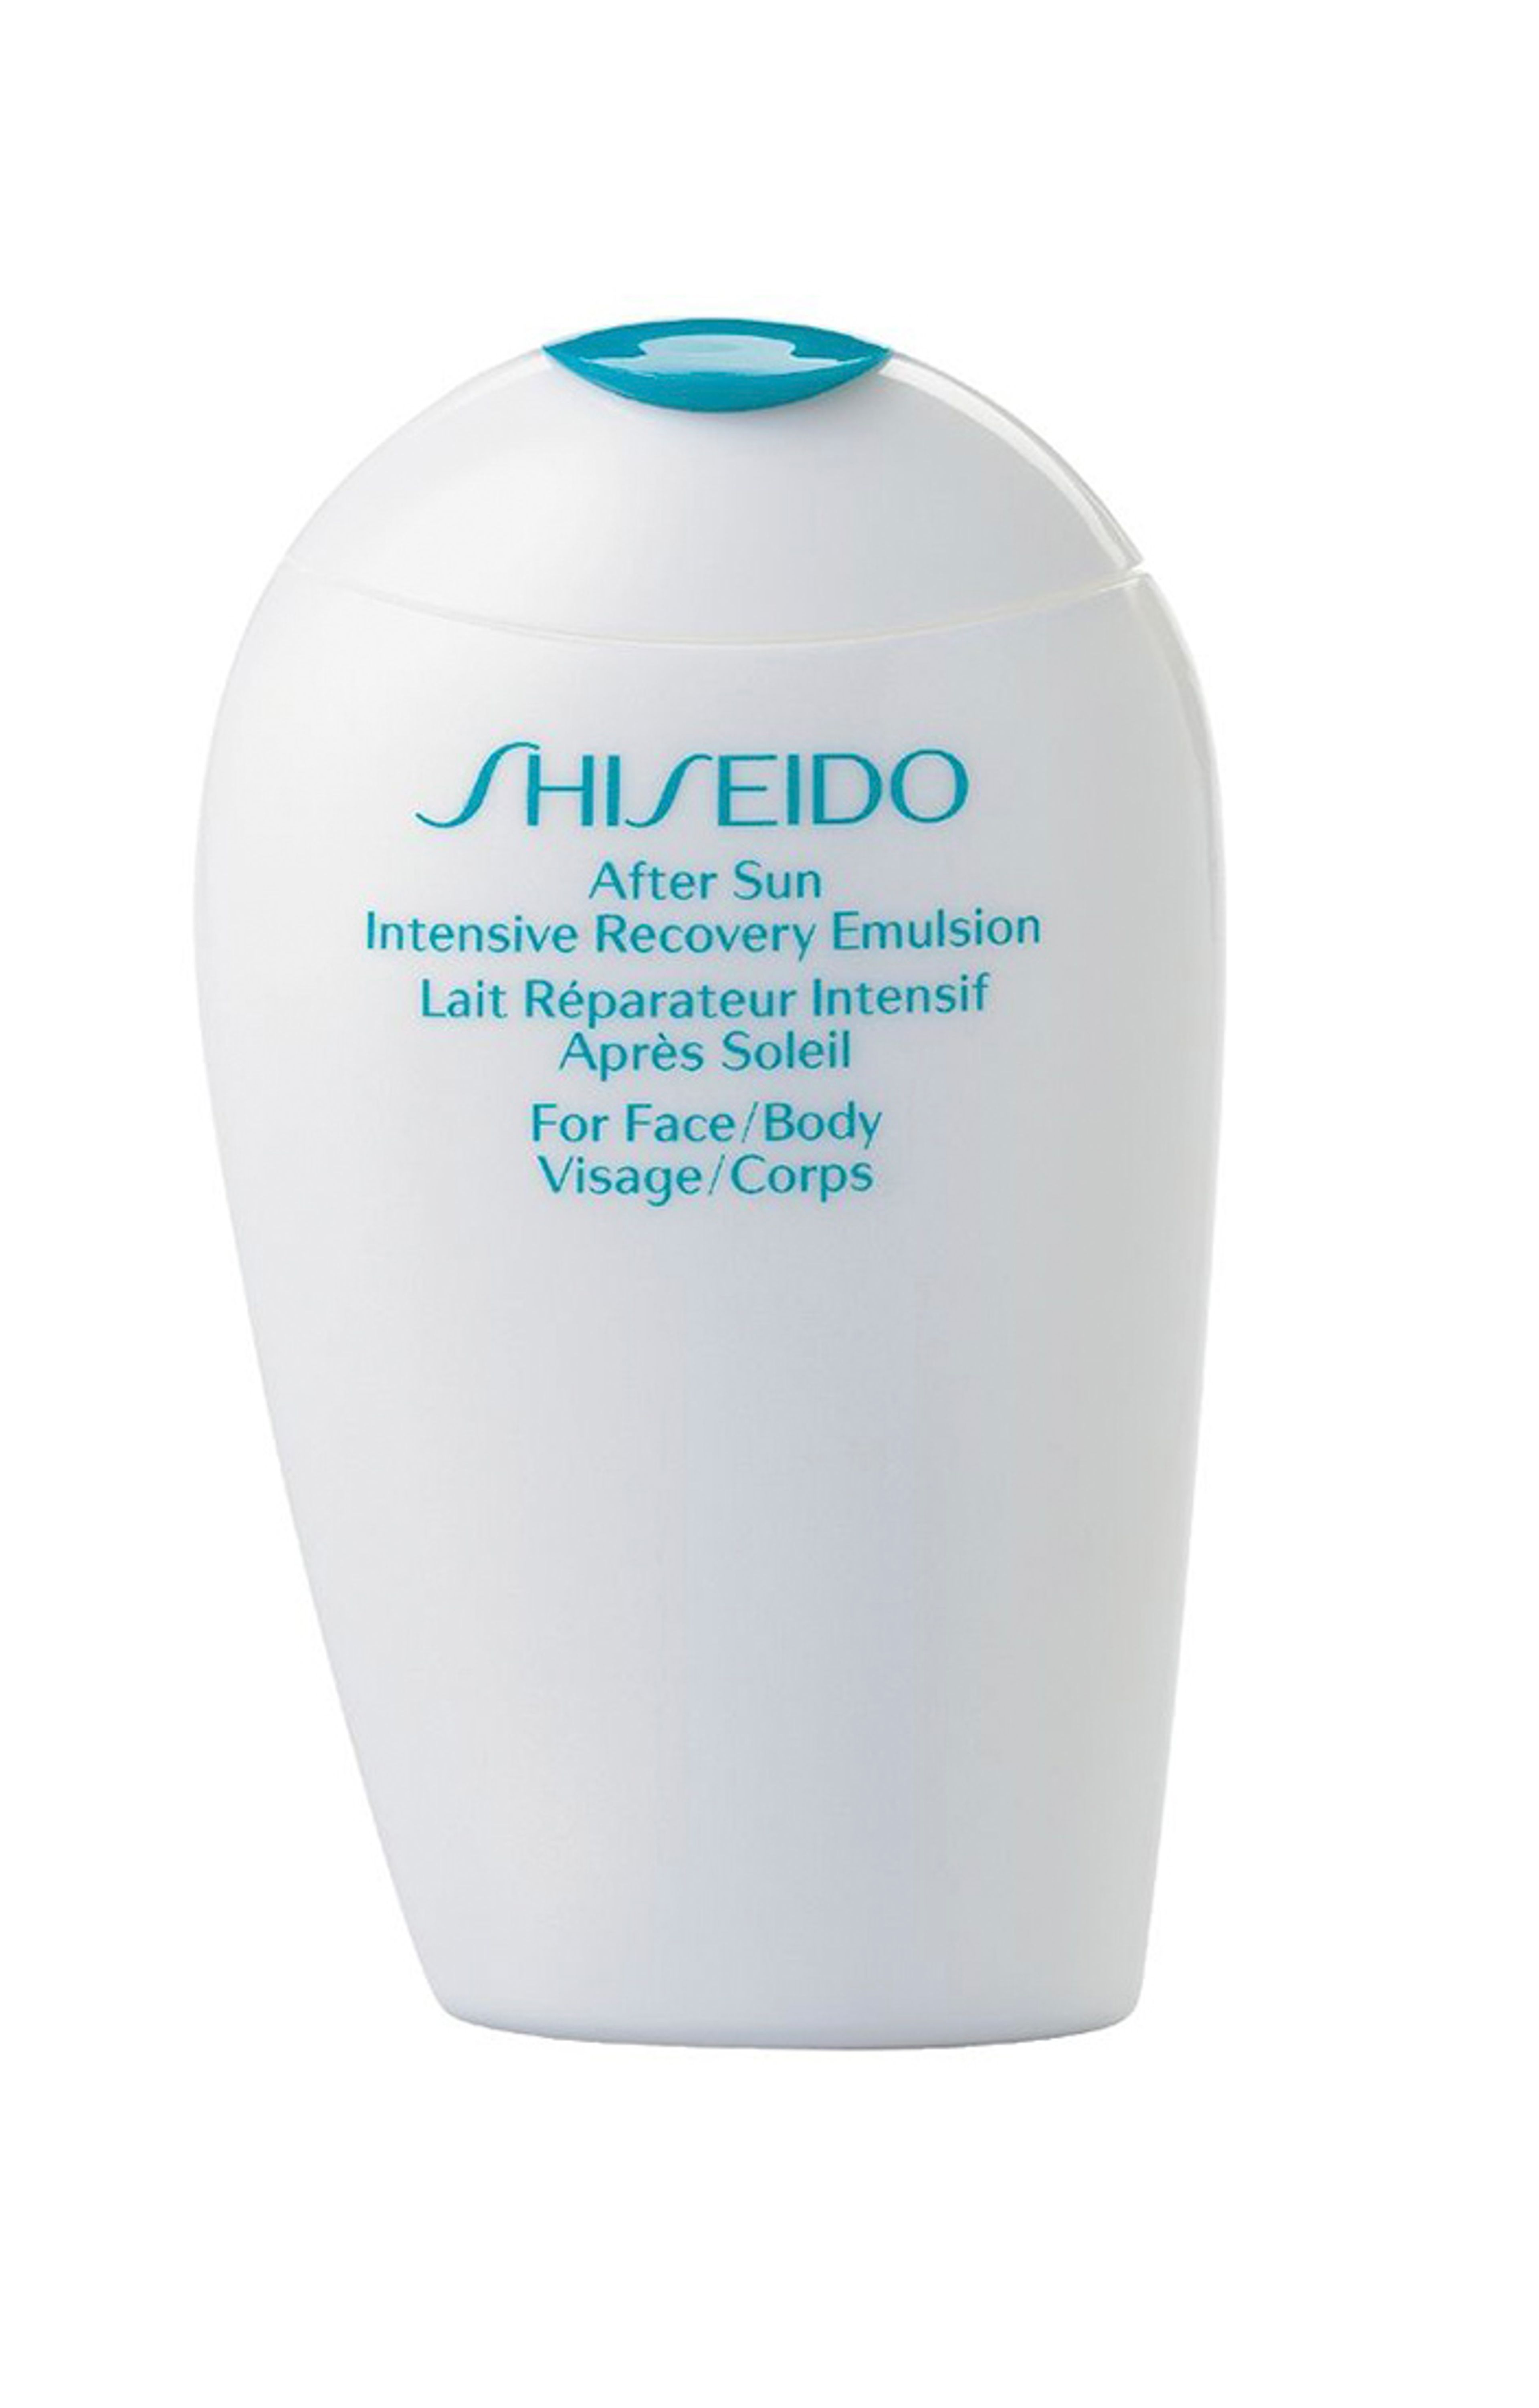 Shiseido After Sun Intensive Recovery Emulsion 1